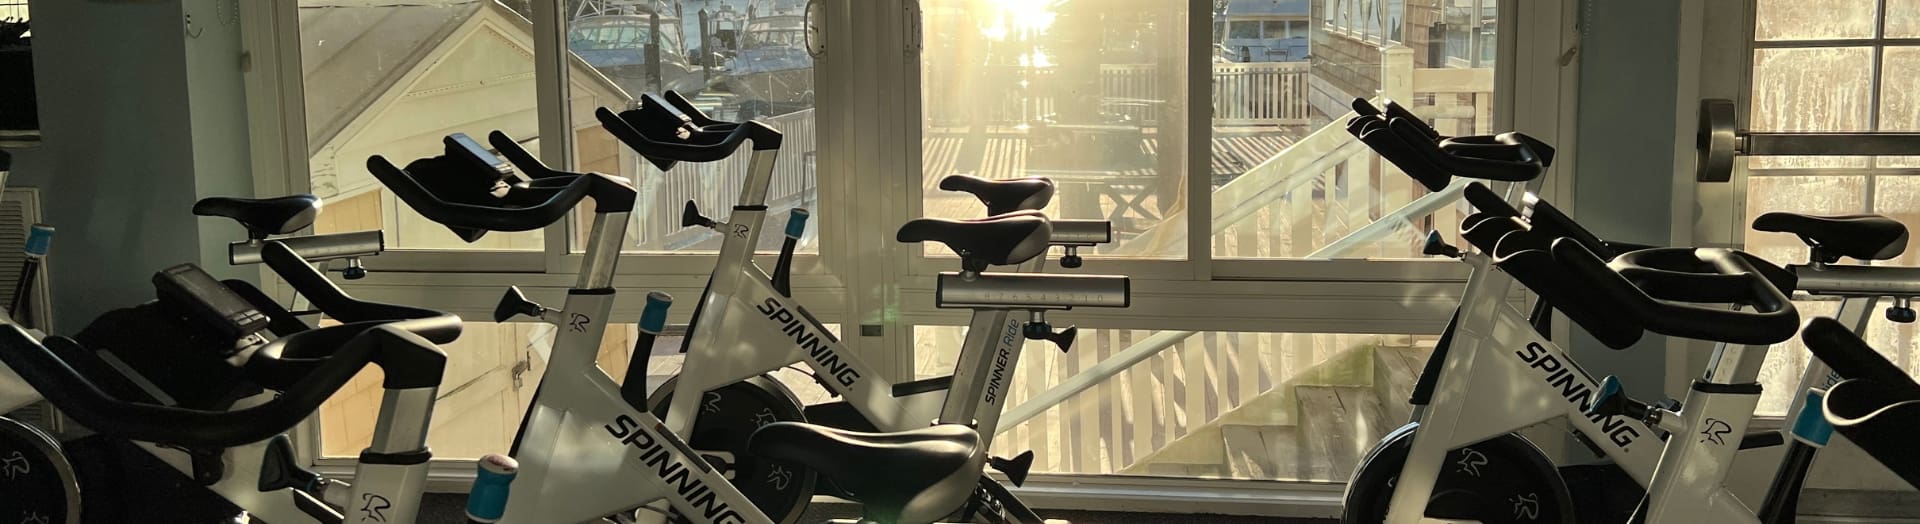 a spinning studio at inlet fitness virginia beach gym